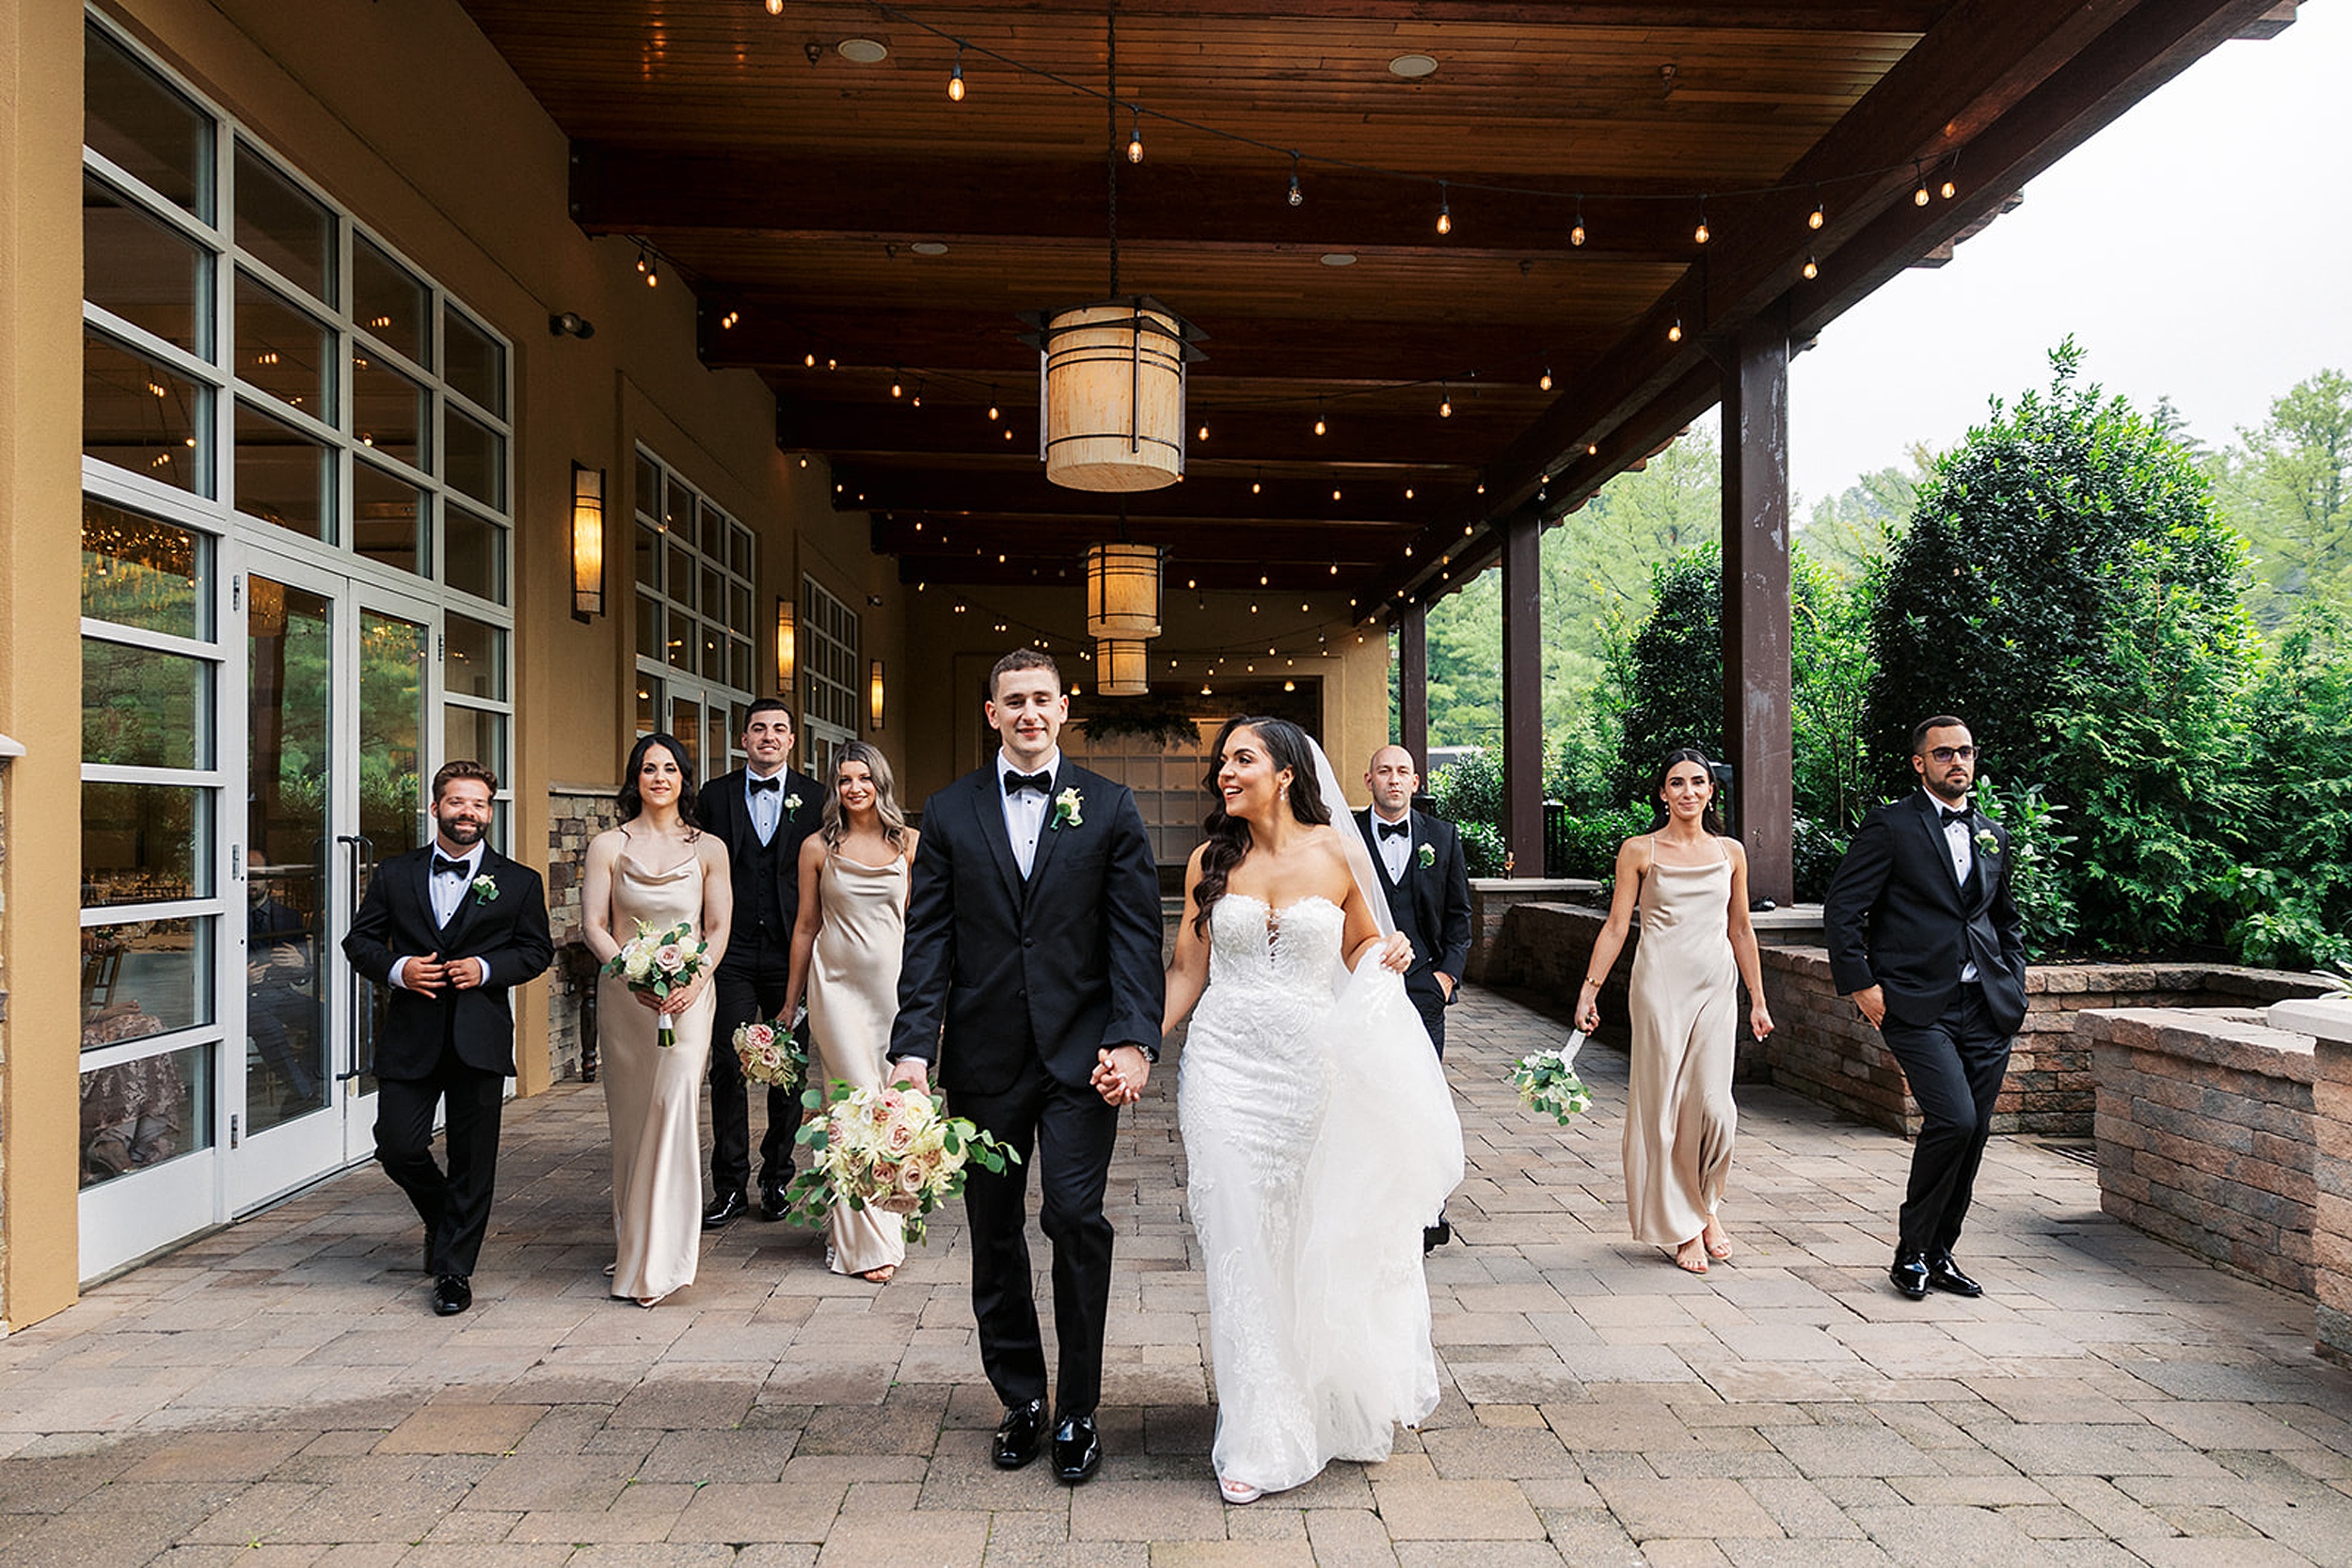 Newlyweds hold hands and walk through the patio of the Stonehouse At Stirling Ridge Wedding venue with their wedding party behind them